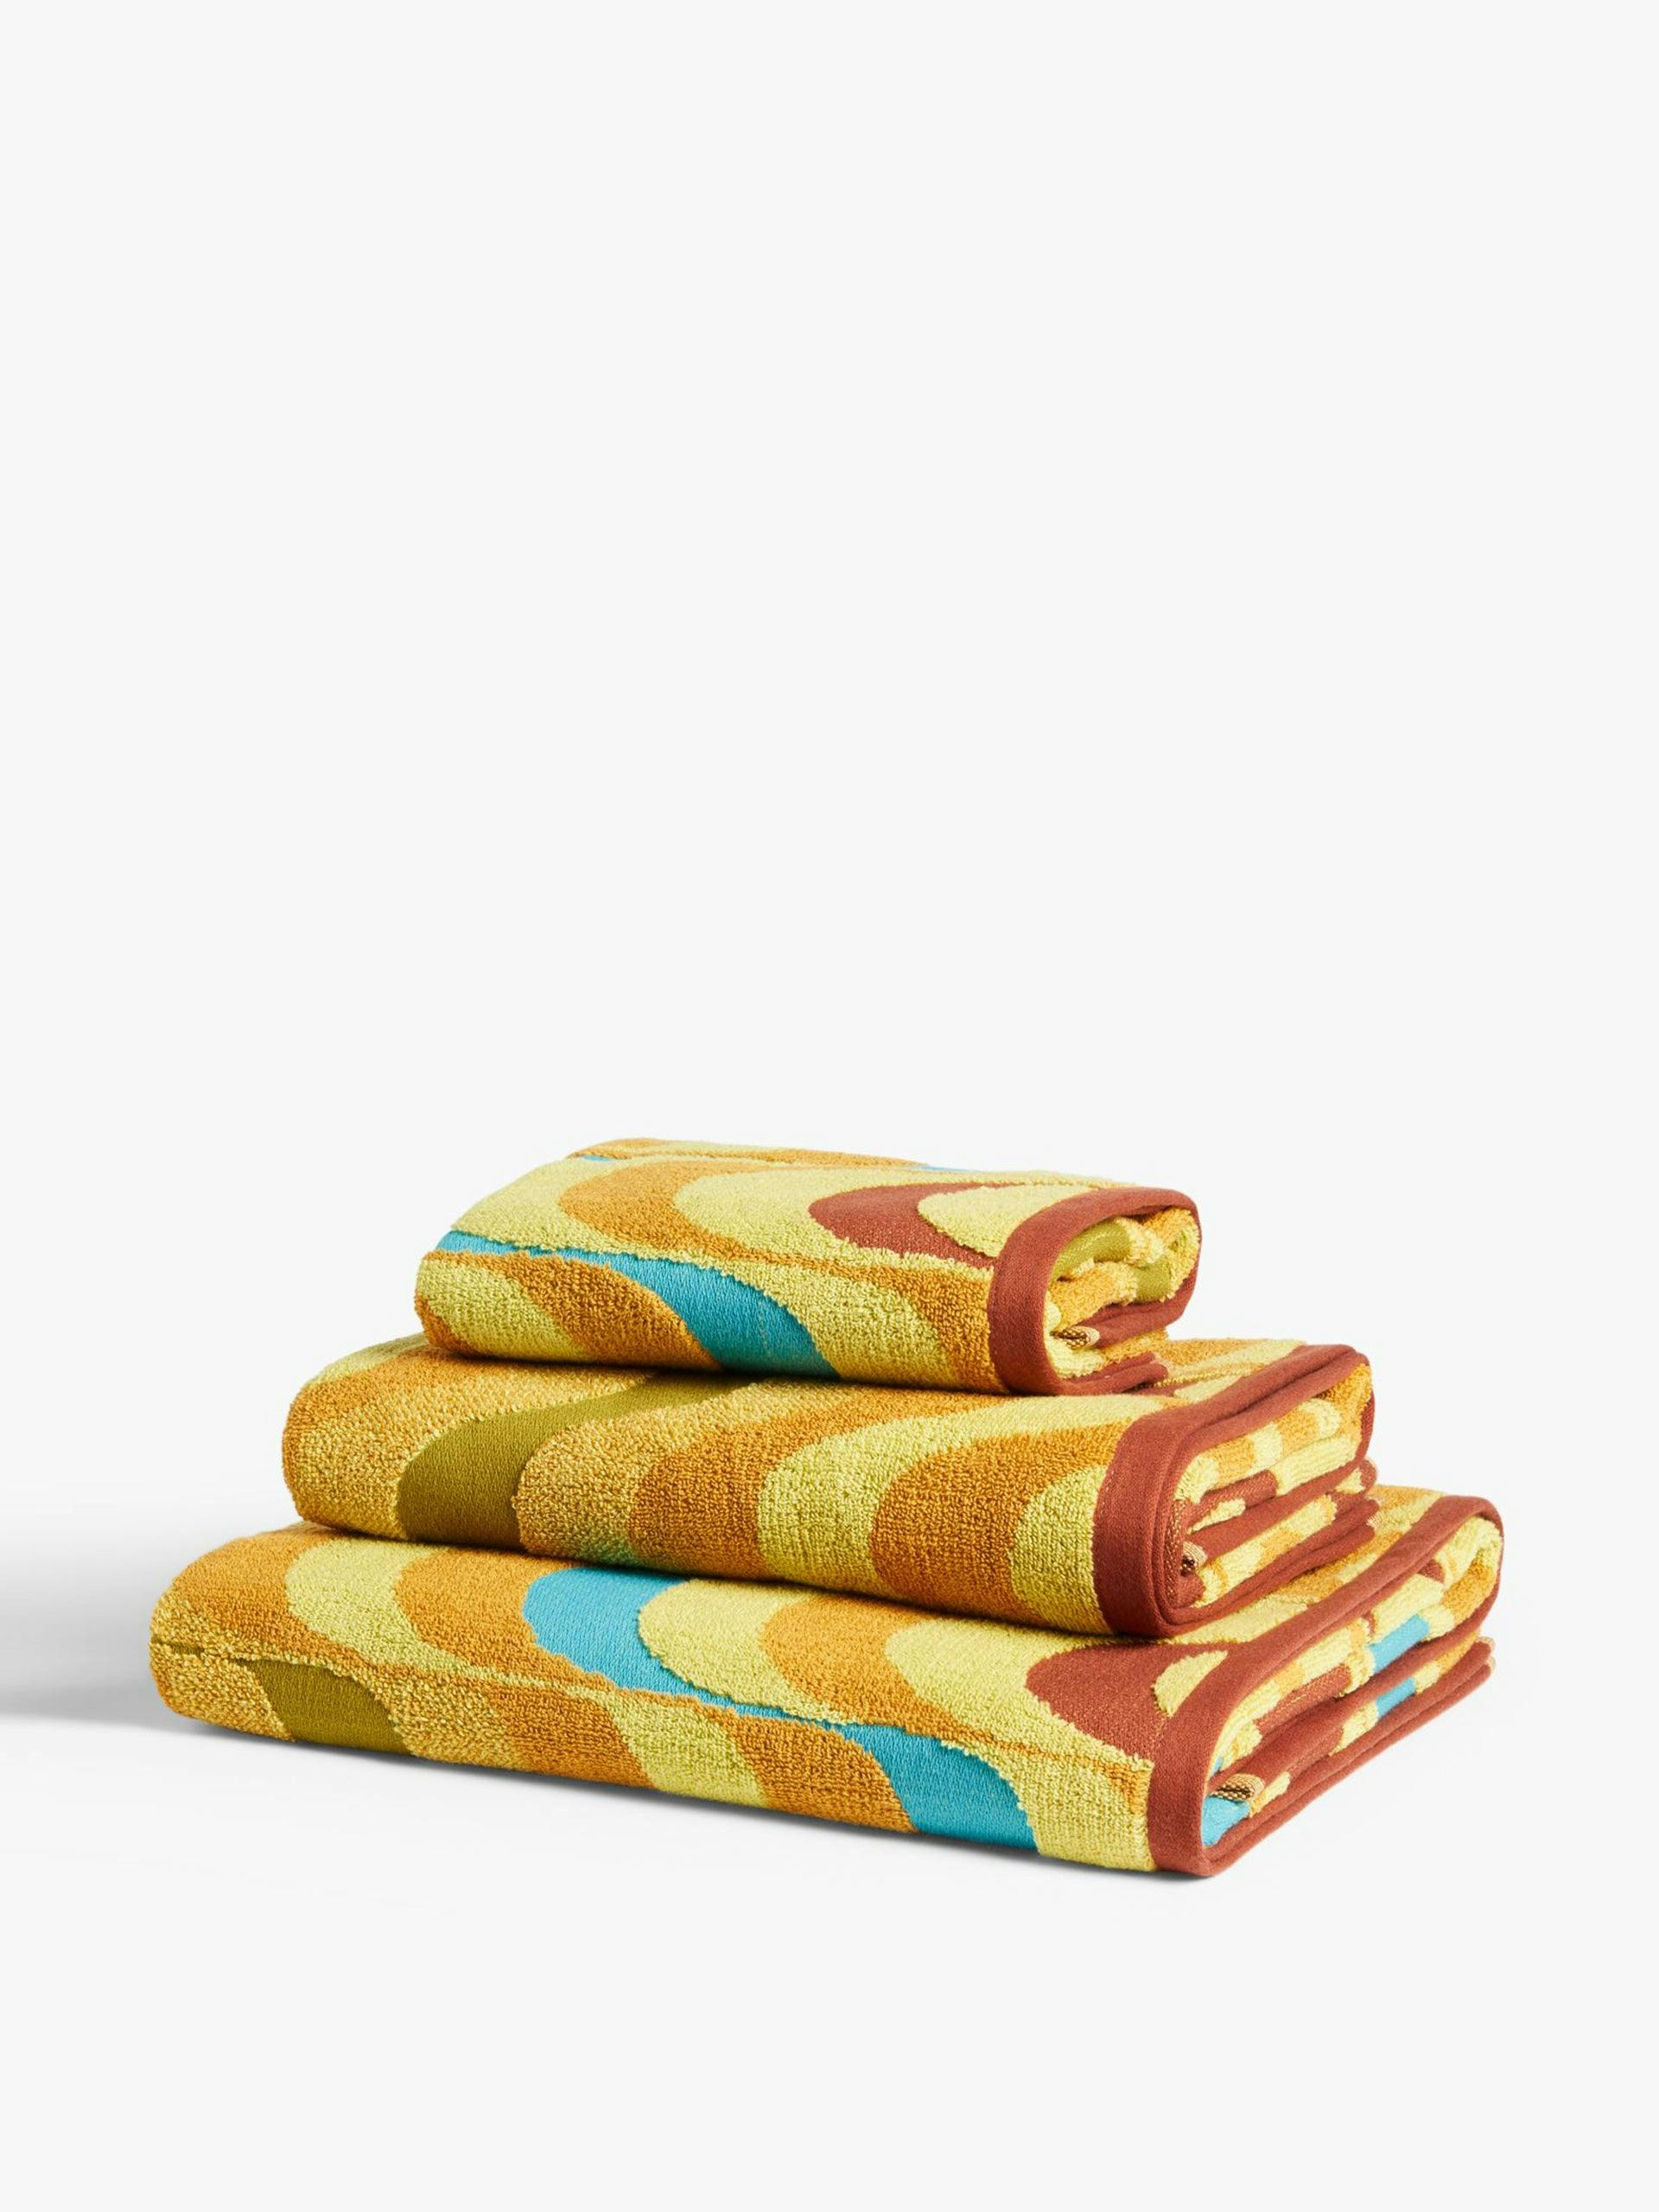 Yellow patterned bath towel